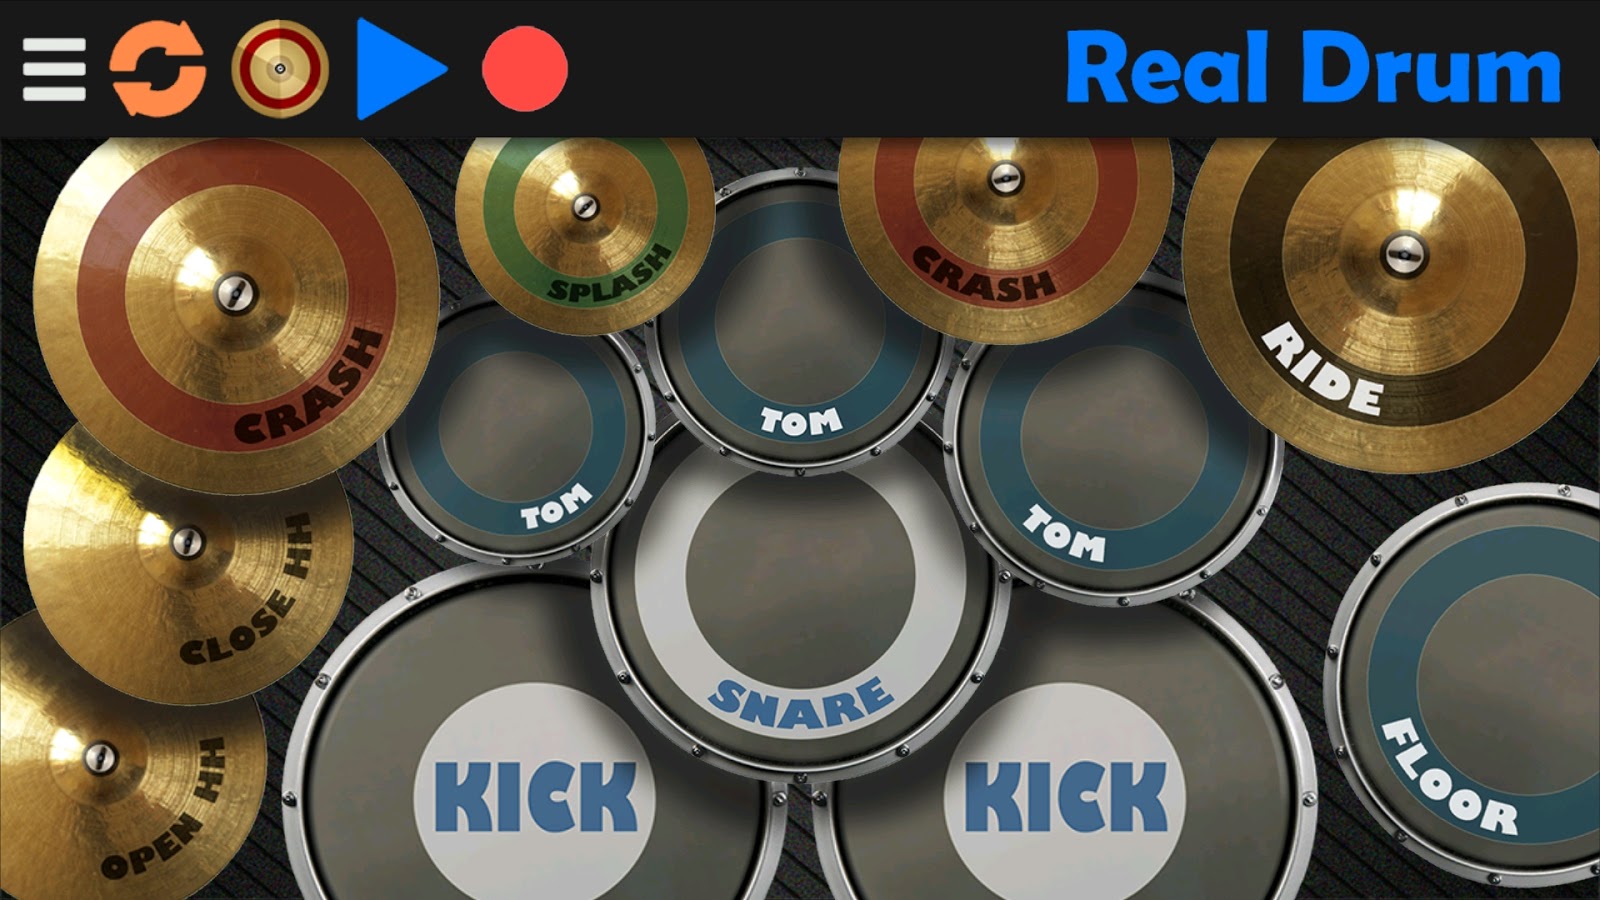 Download Real Drum No Ads Apk Aw94net